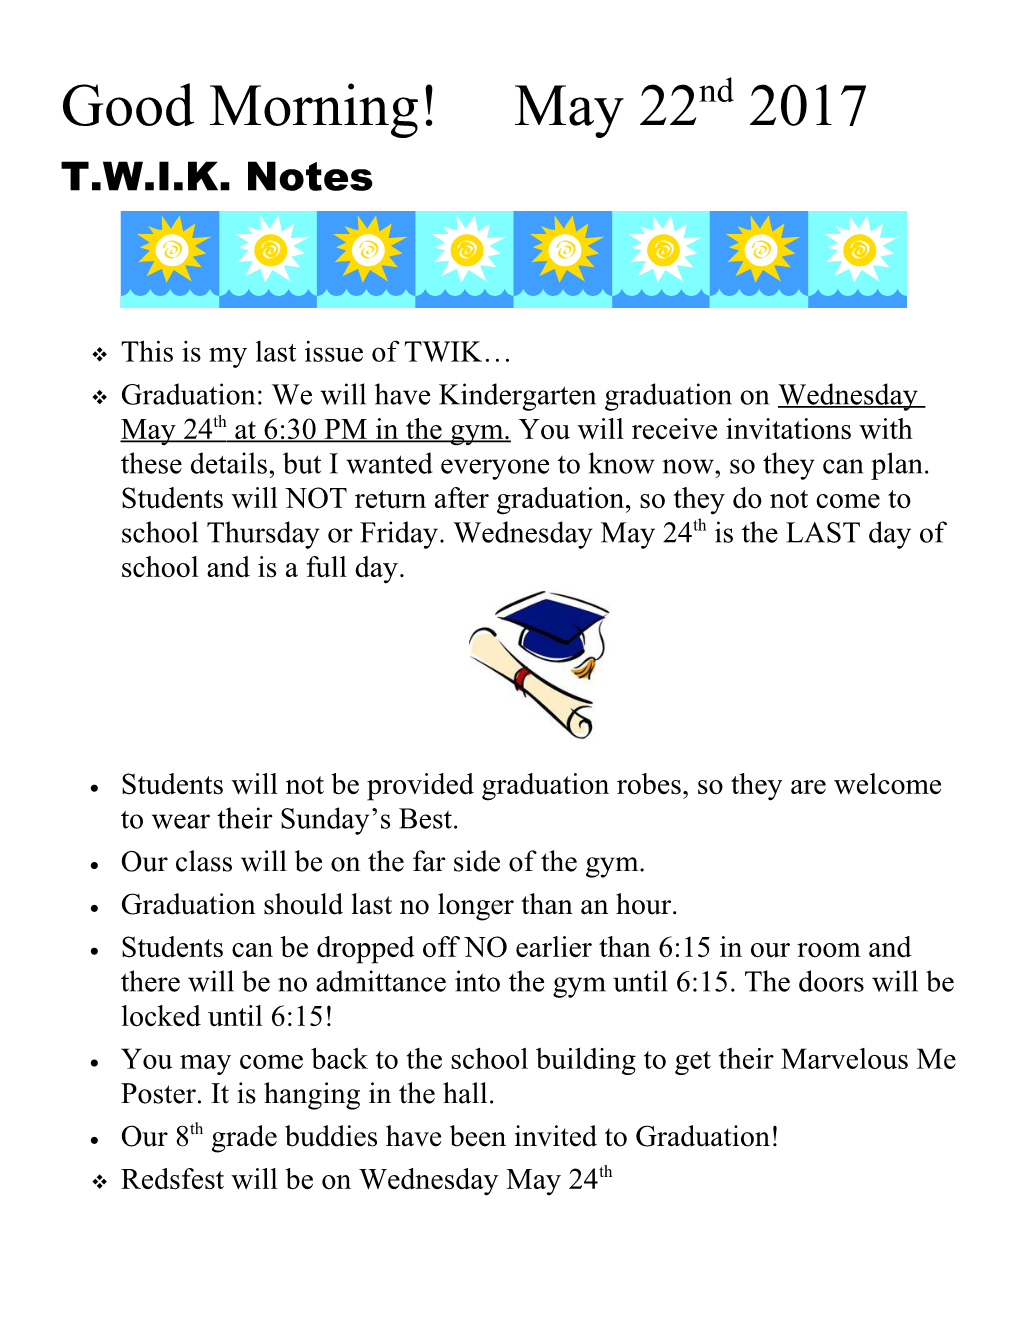 This Is My Last Issue of TWIK